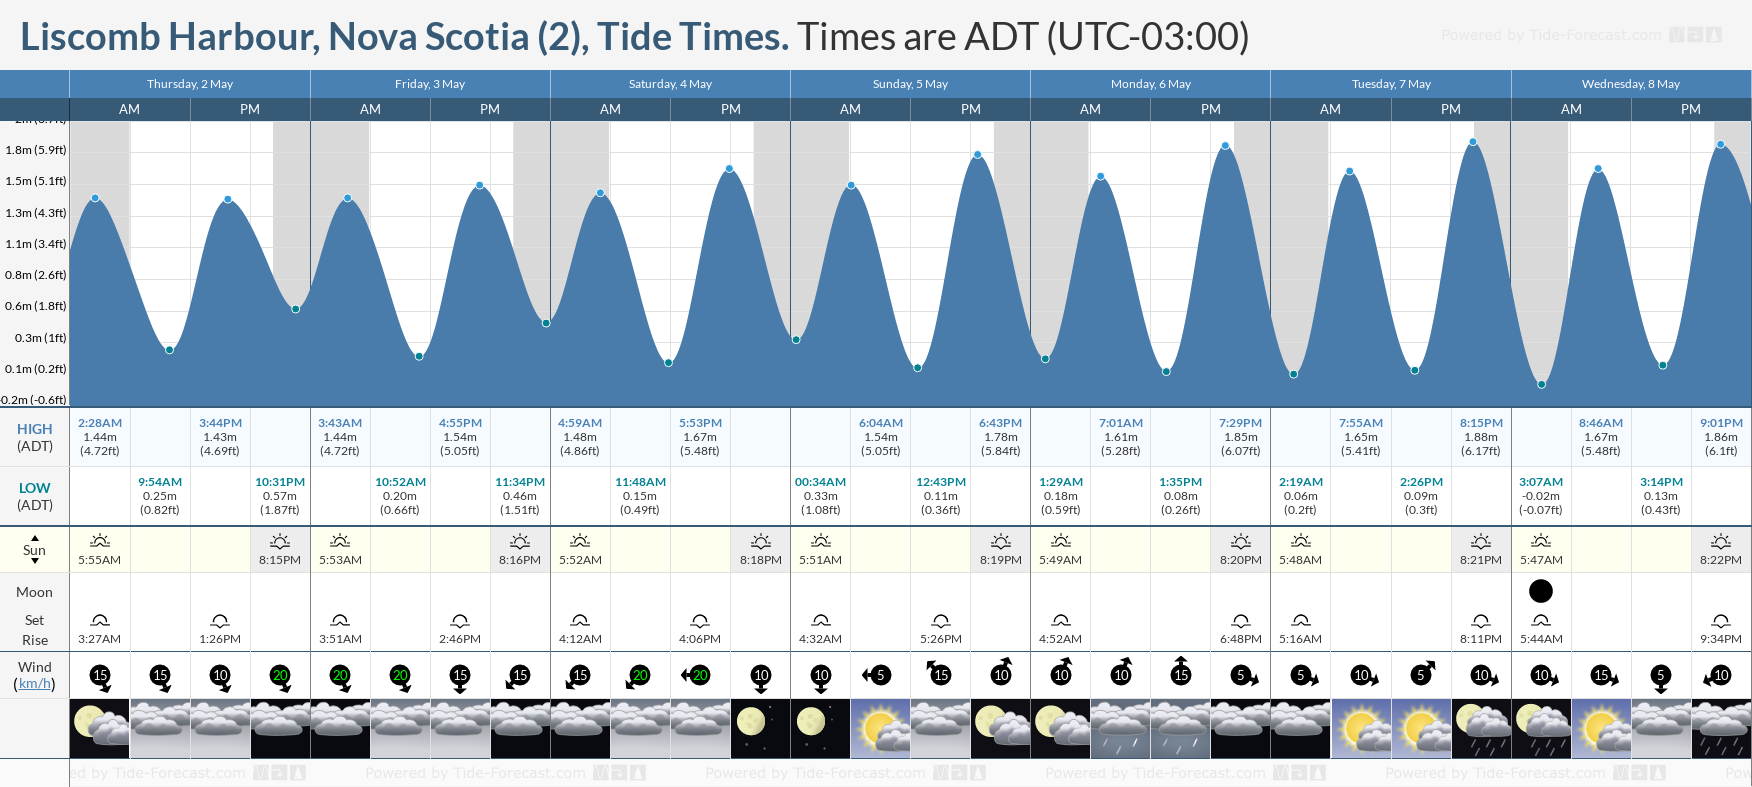 Liscomb Harbour, Nova Scotia (2) Tide Chart including high and low tide times for the next 7 days